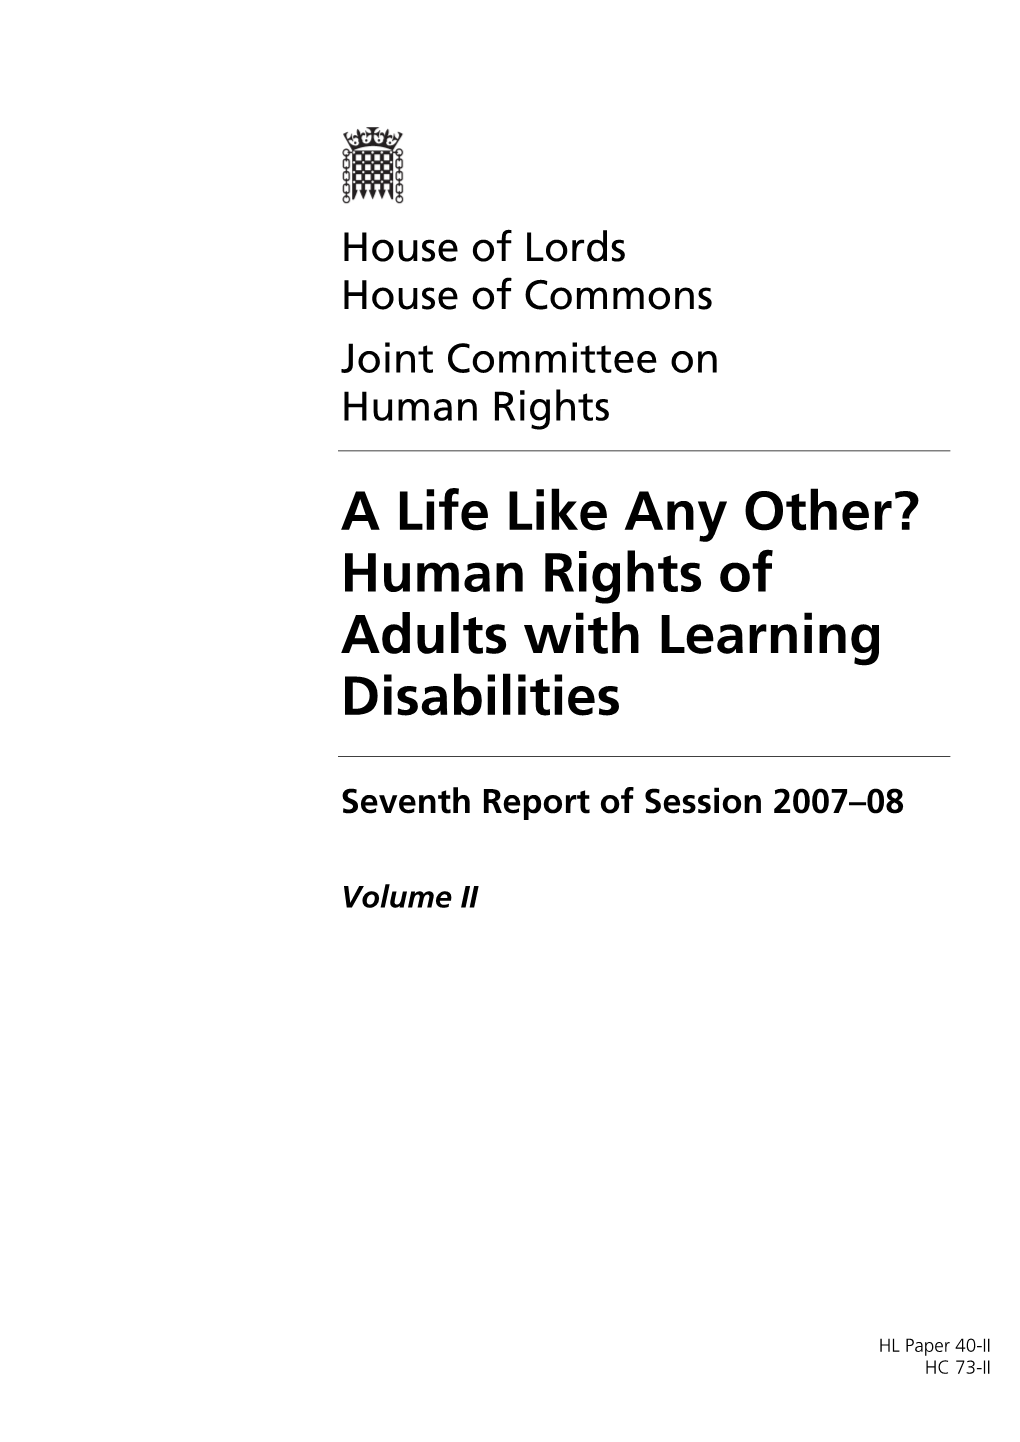 Human Rights of Adults with Learning Disabilities